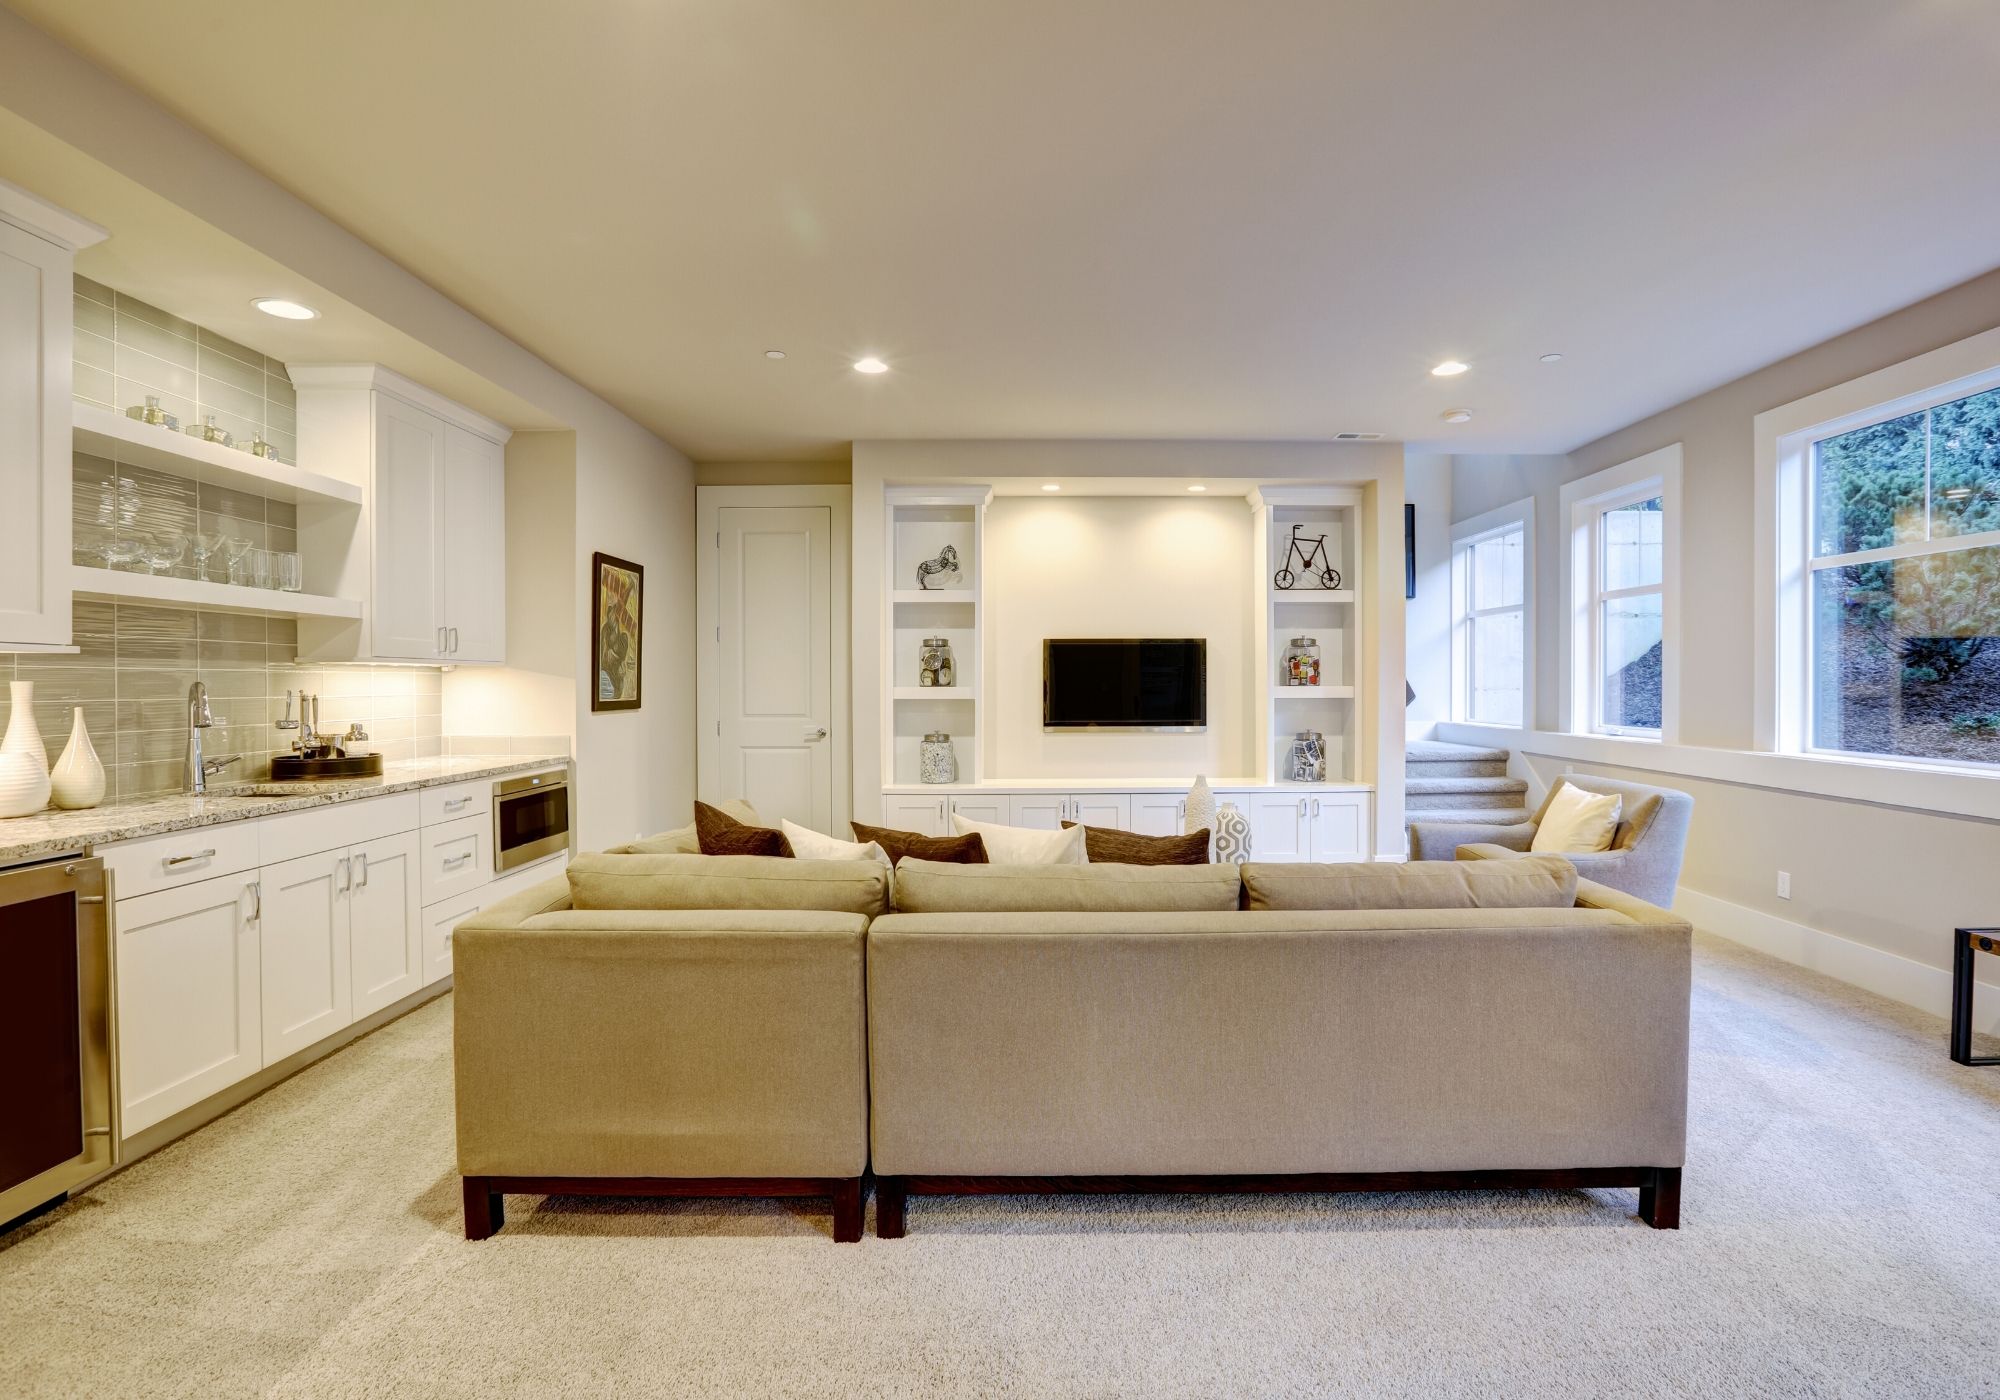 Best Basement Remodeling Ideas for Additional Living Space